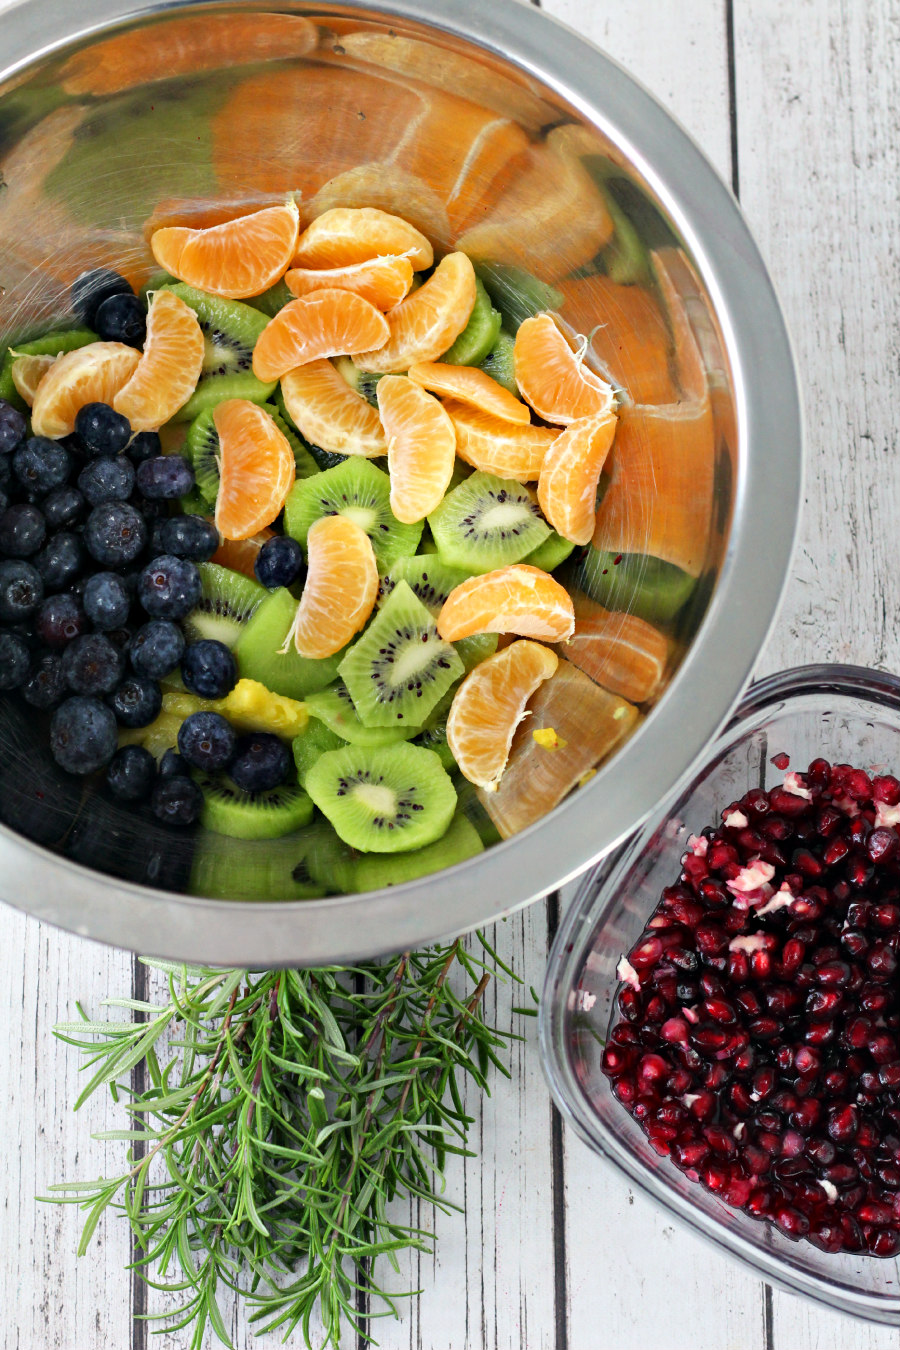 Prepared pineapple, clementines, blueberries, kiwis, and pomegranate arils in bowls. Sprigs of fresh rosemary sit alongside bowls.